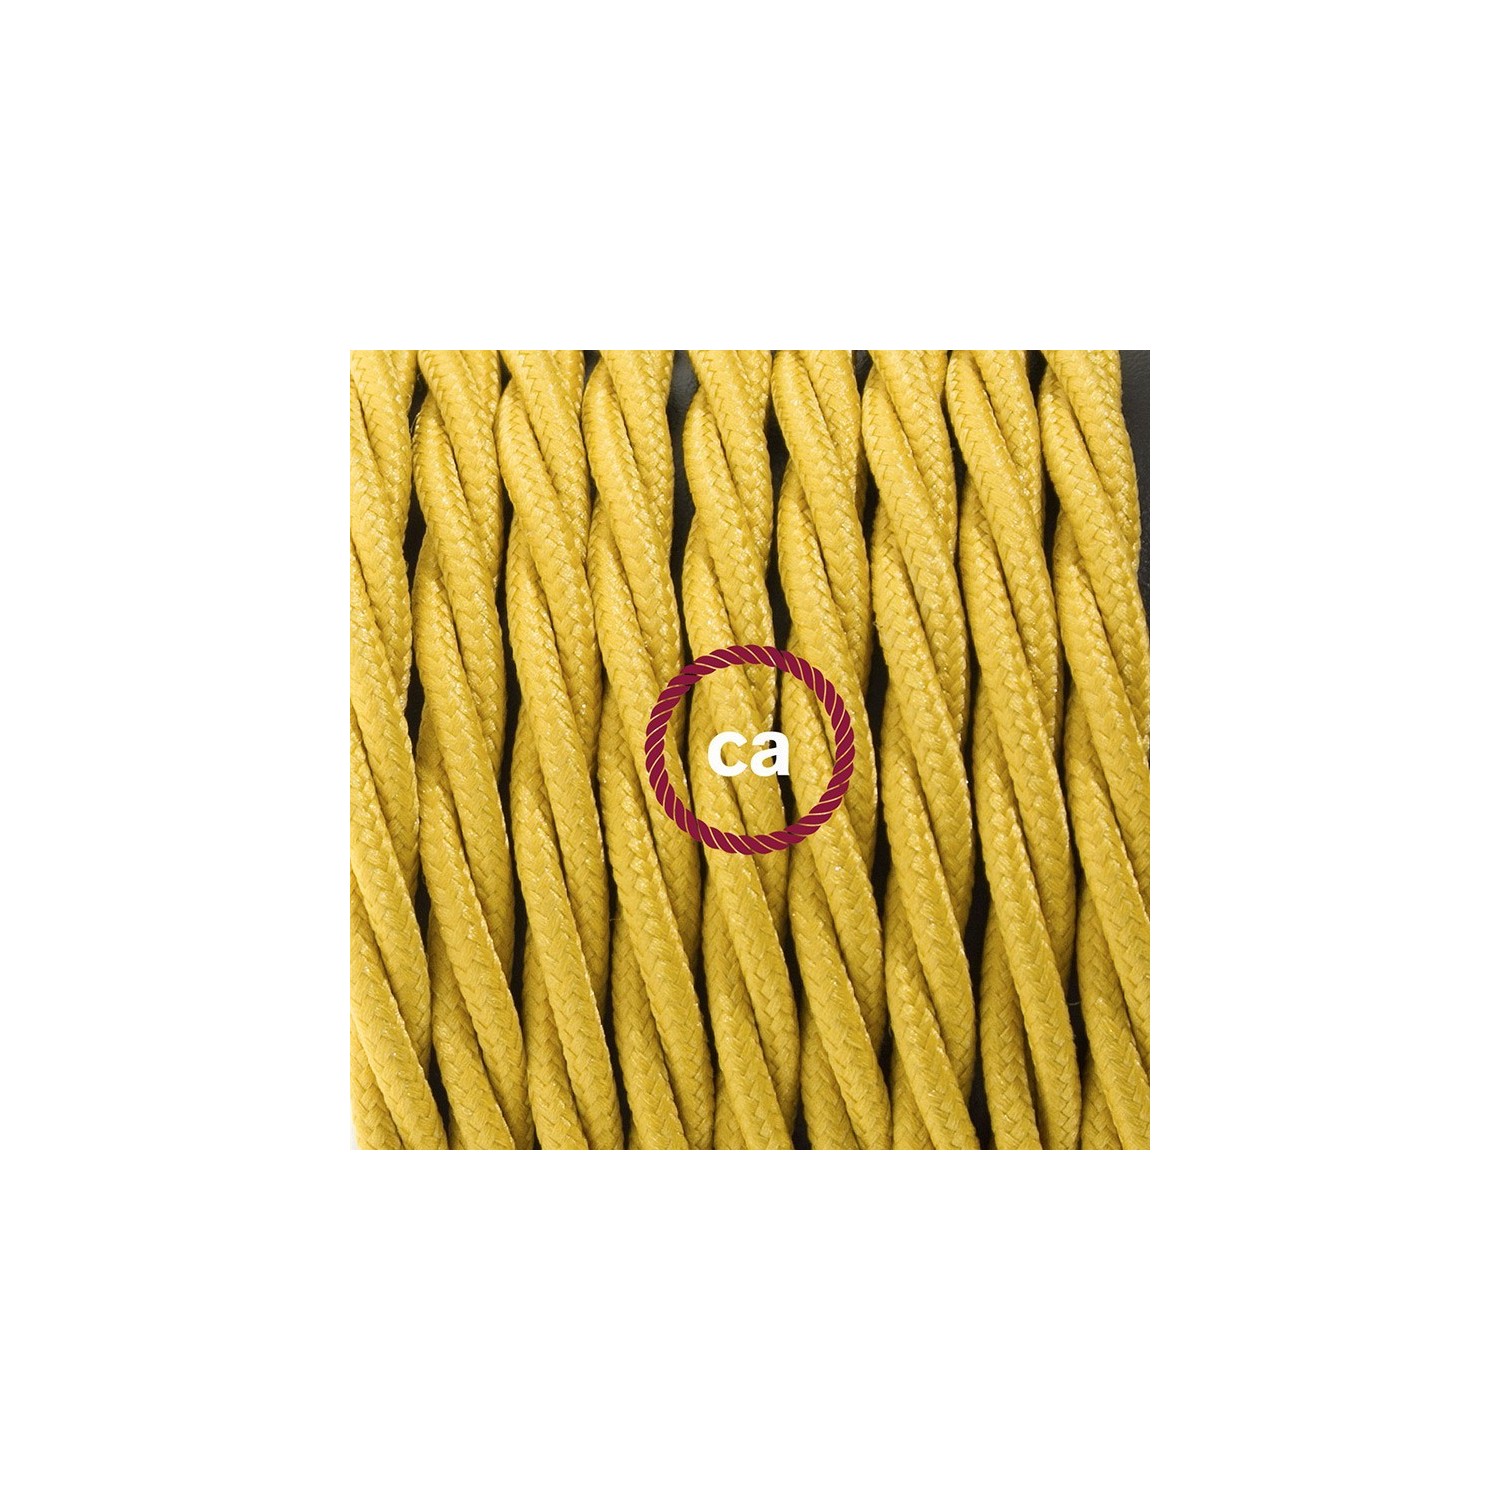 Create your TM25 Mustard Rayon Snake and bring the light wherever you want.